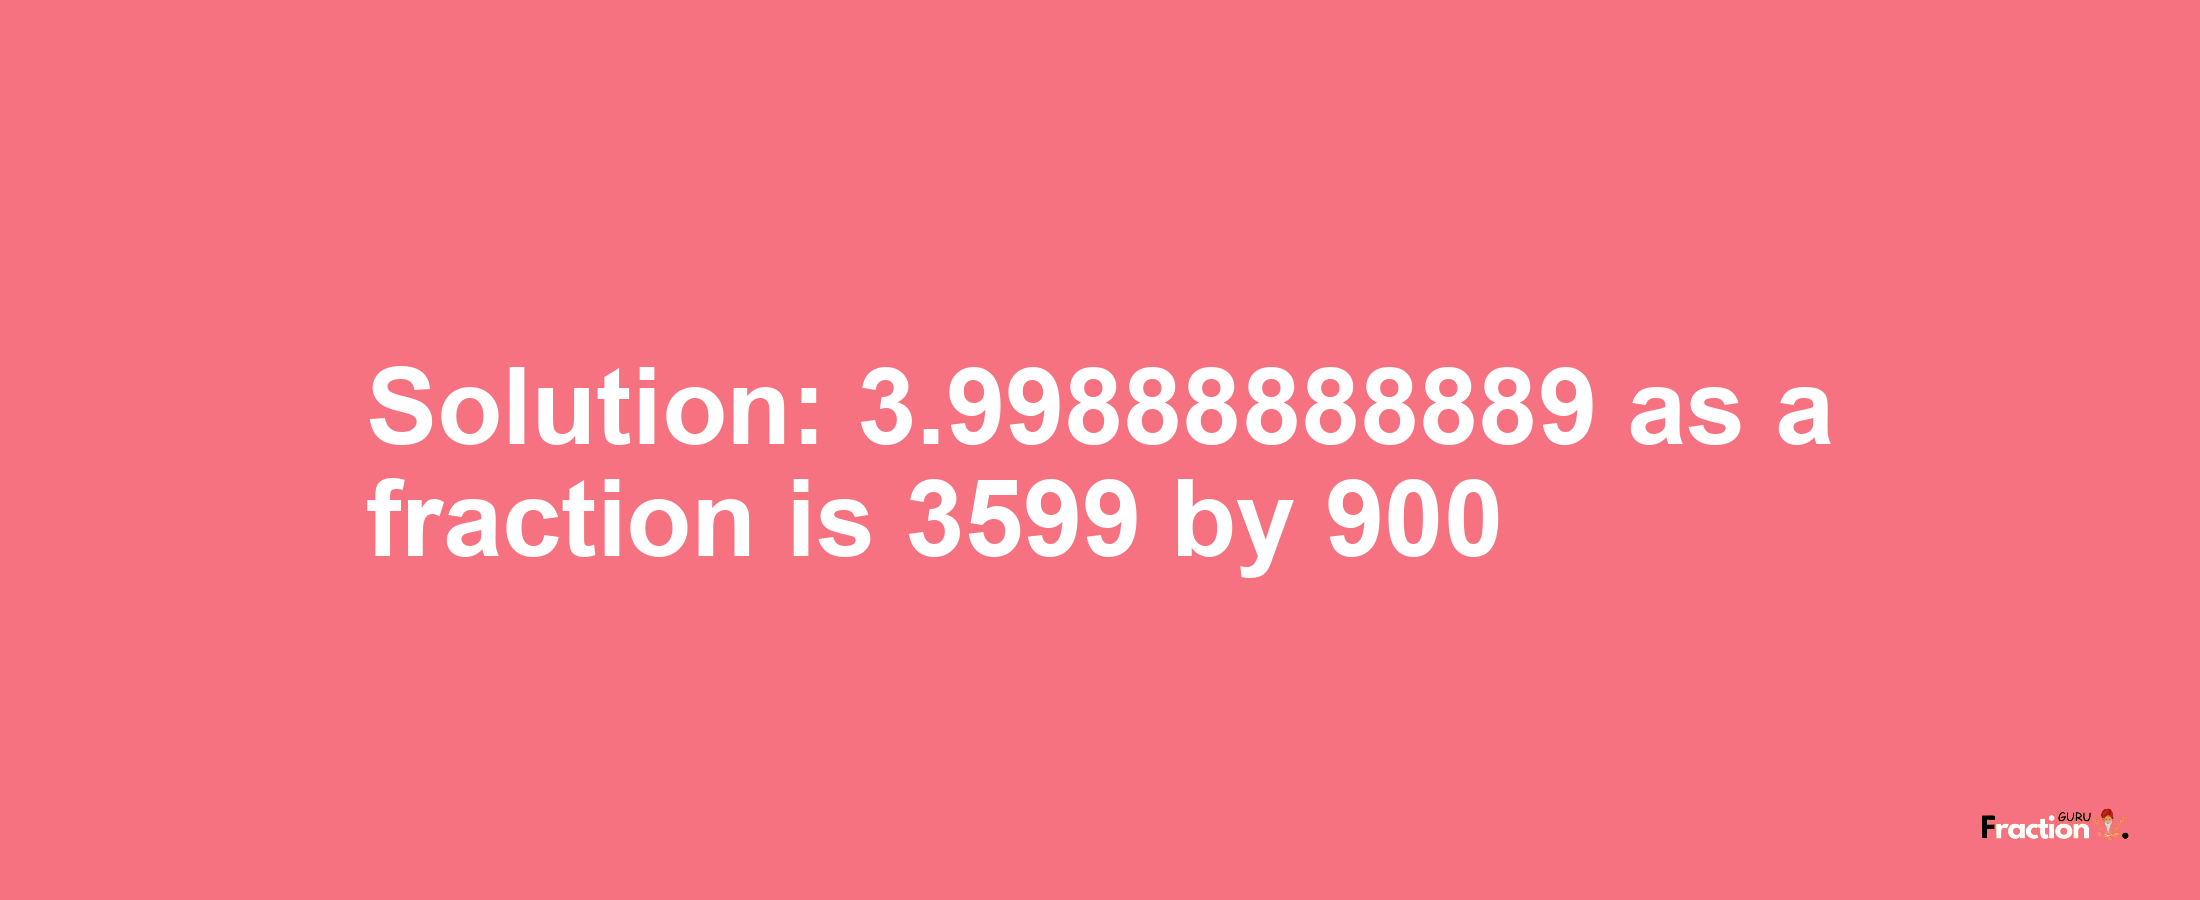 Solution:3.99888888889 as a fraction is 3599/900